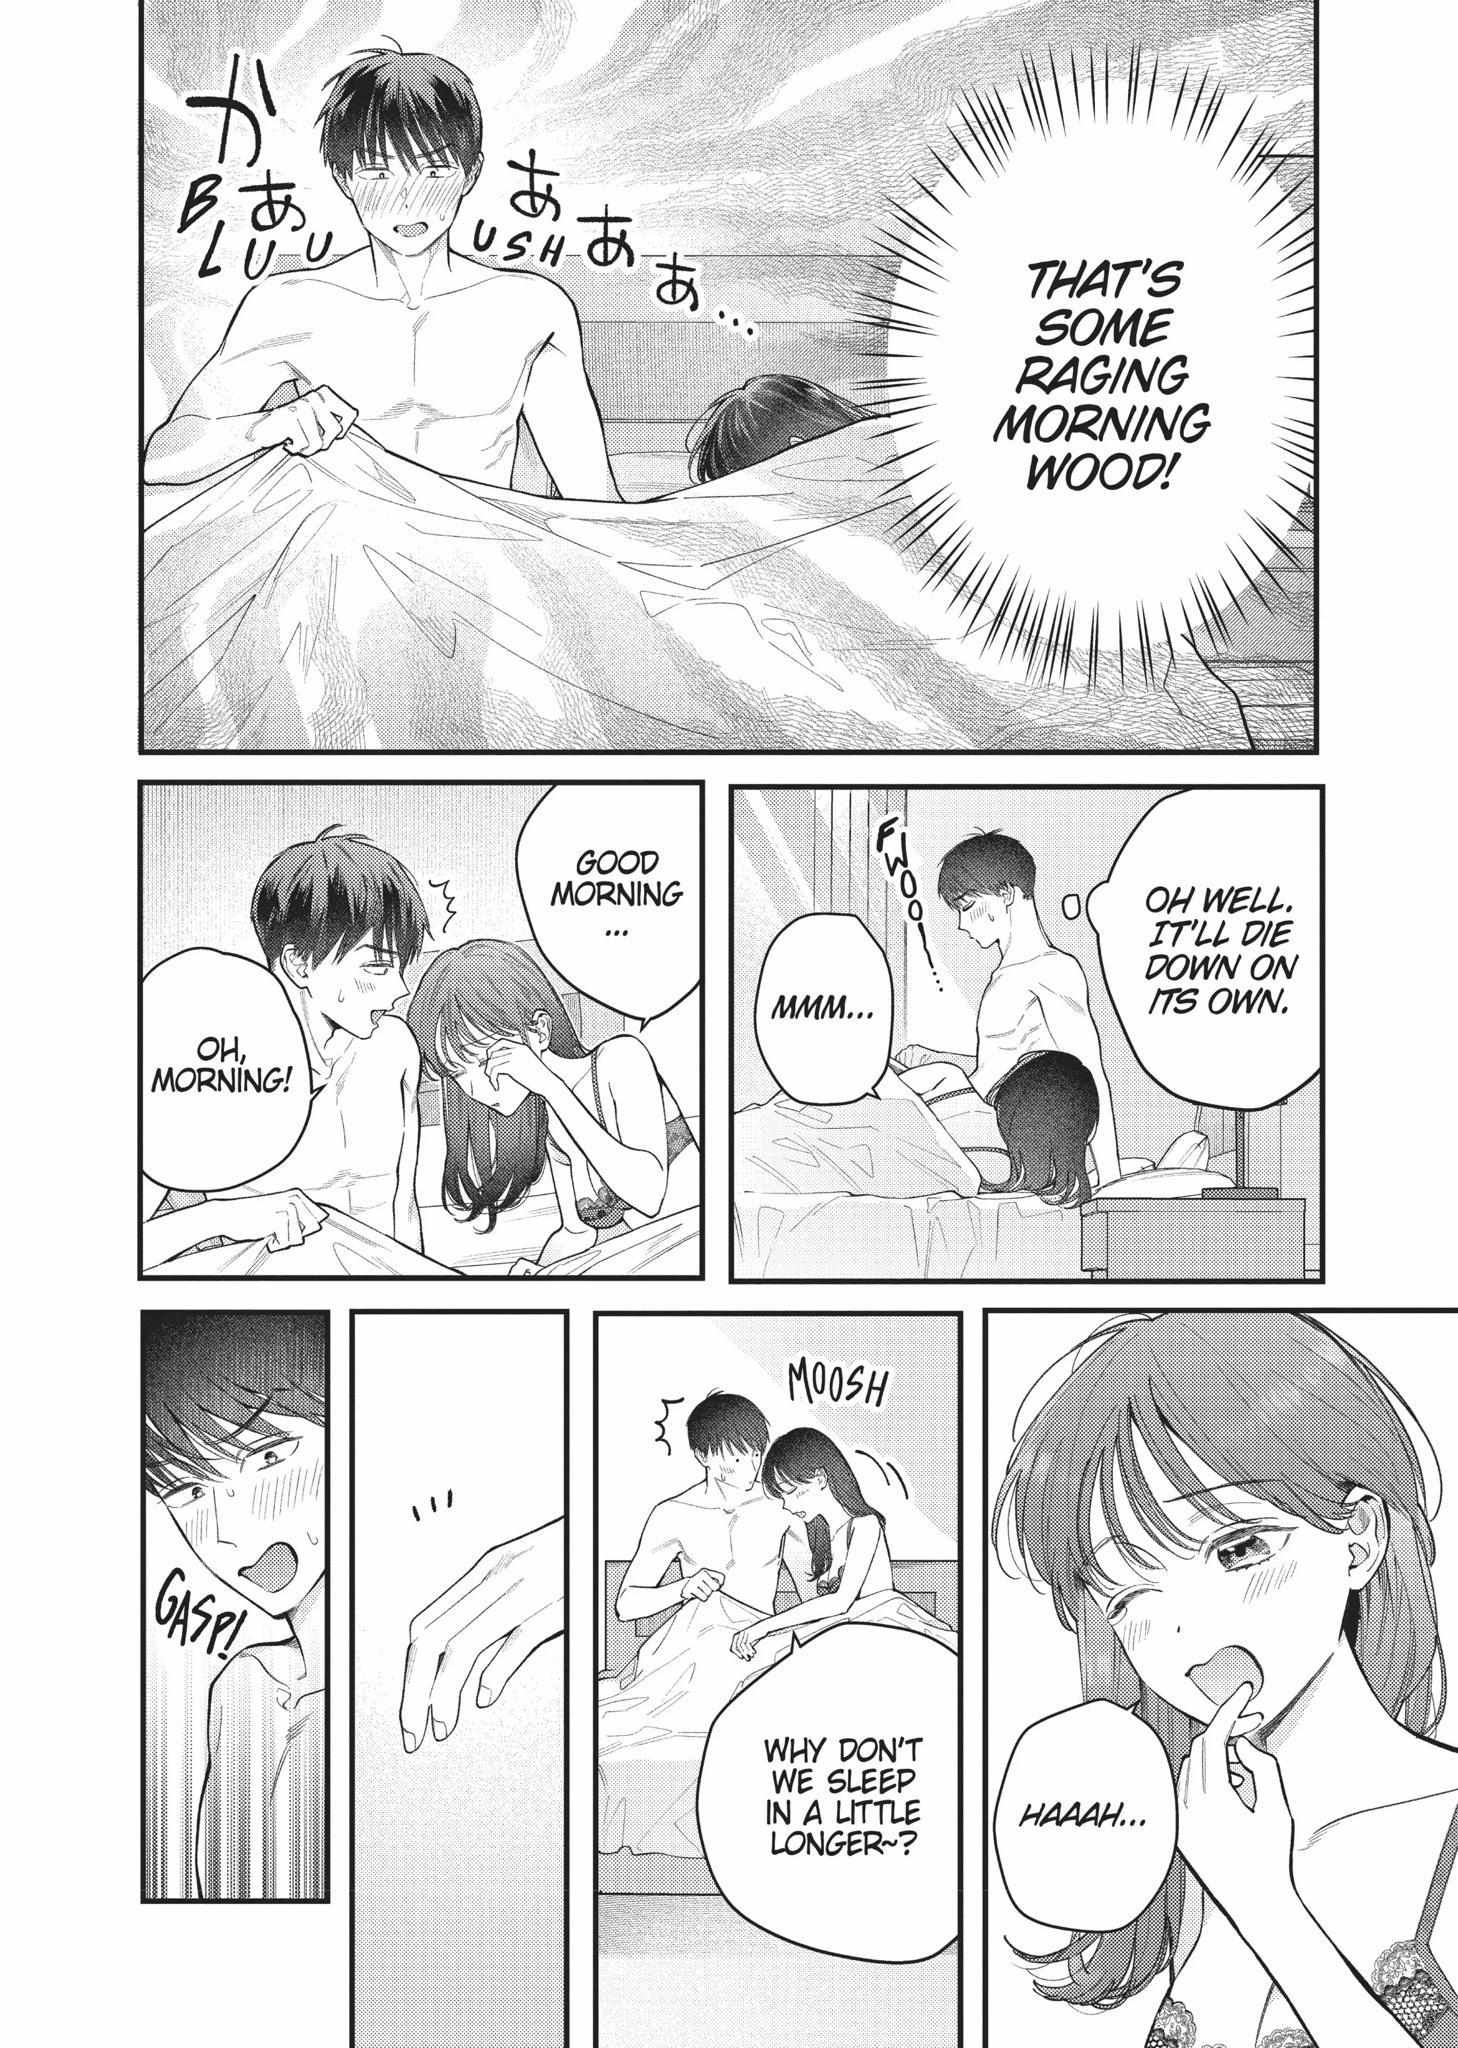 Is It Wrong To Get Done By A Girl? - Page 3